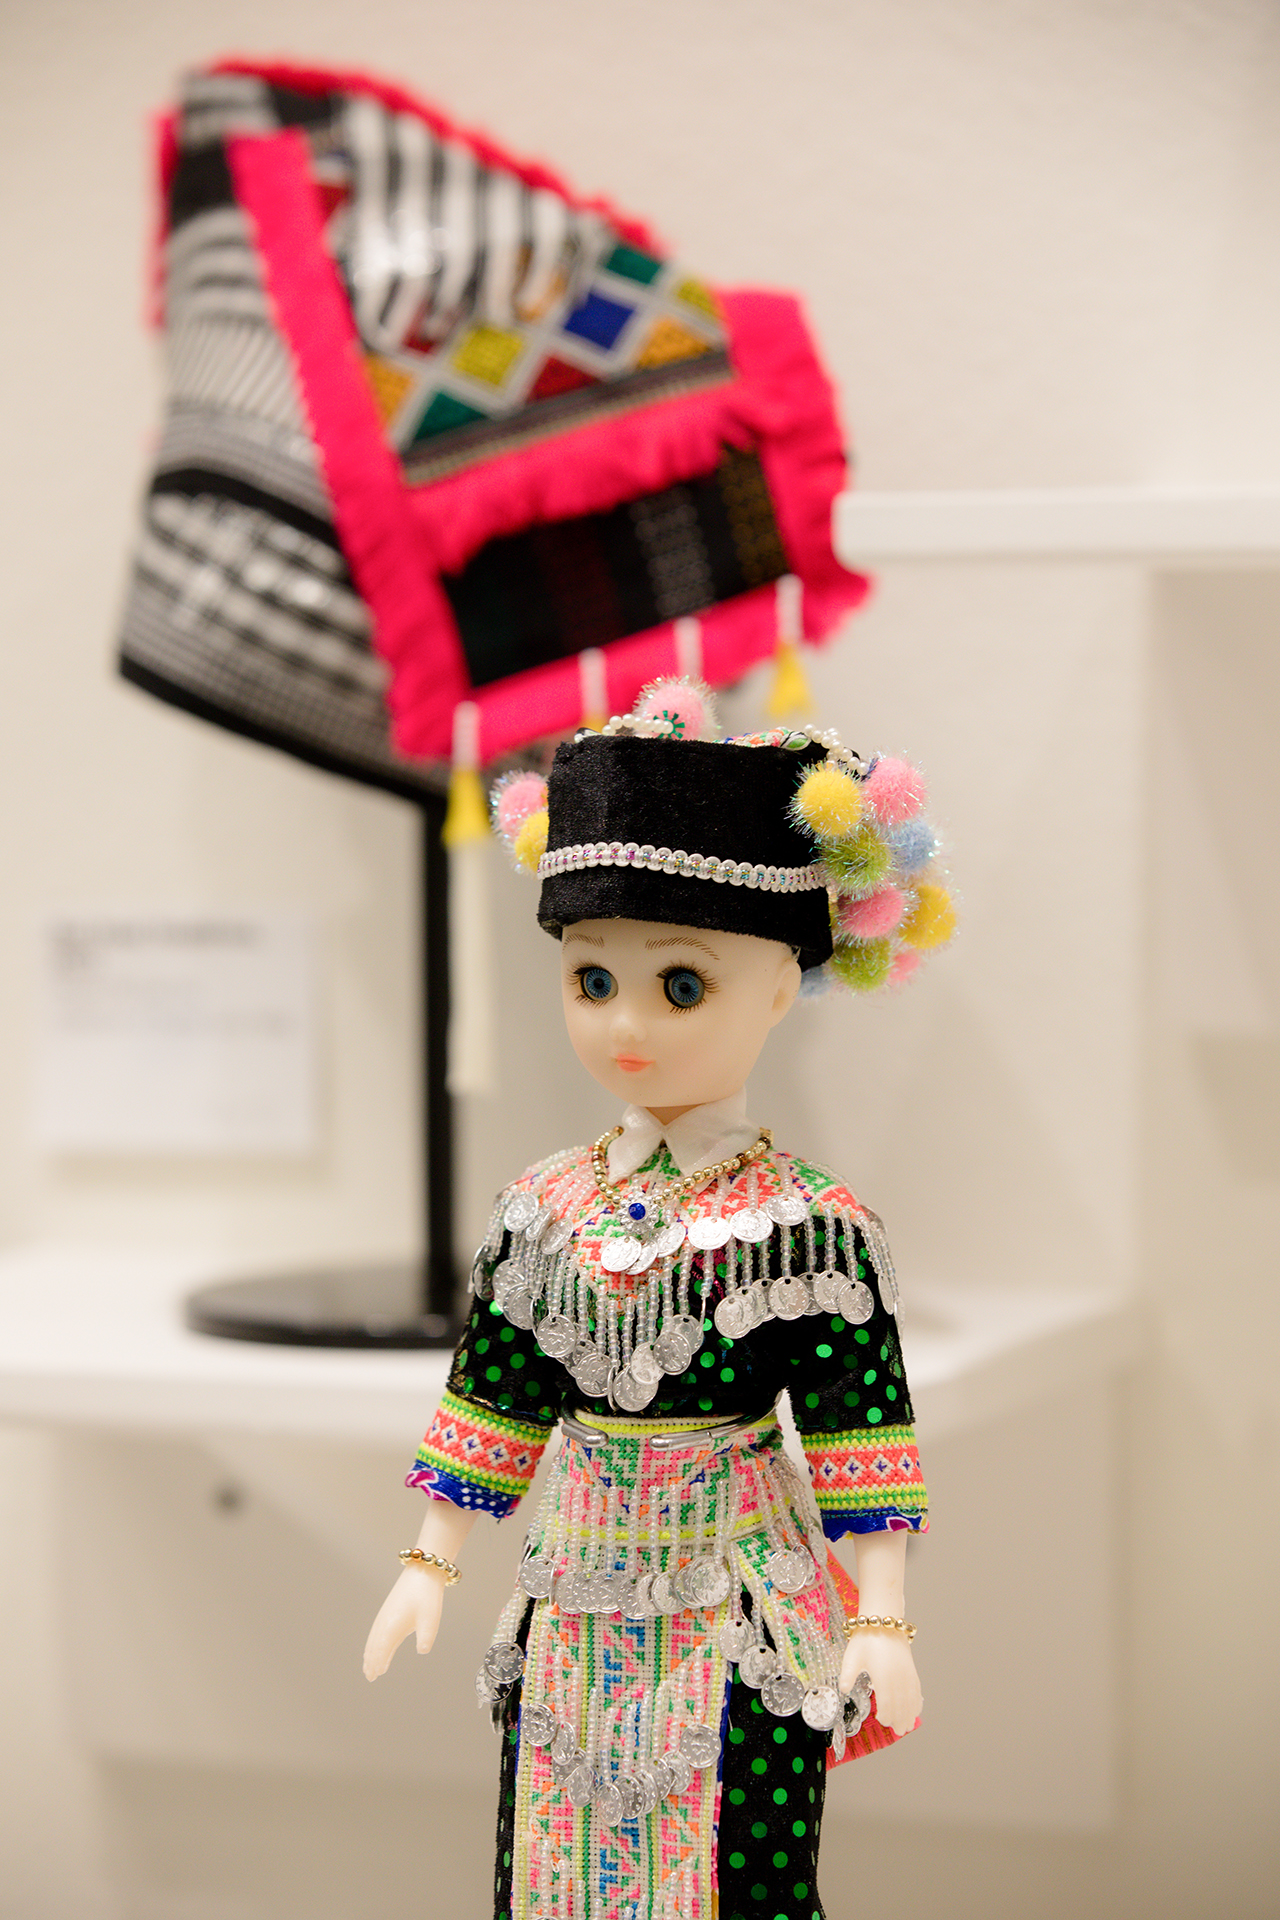 A doll on display as part of the Cloth as Community exhibit is dressed in traditional Hmong clothing.